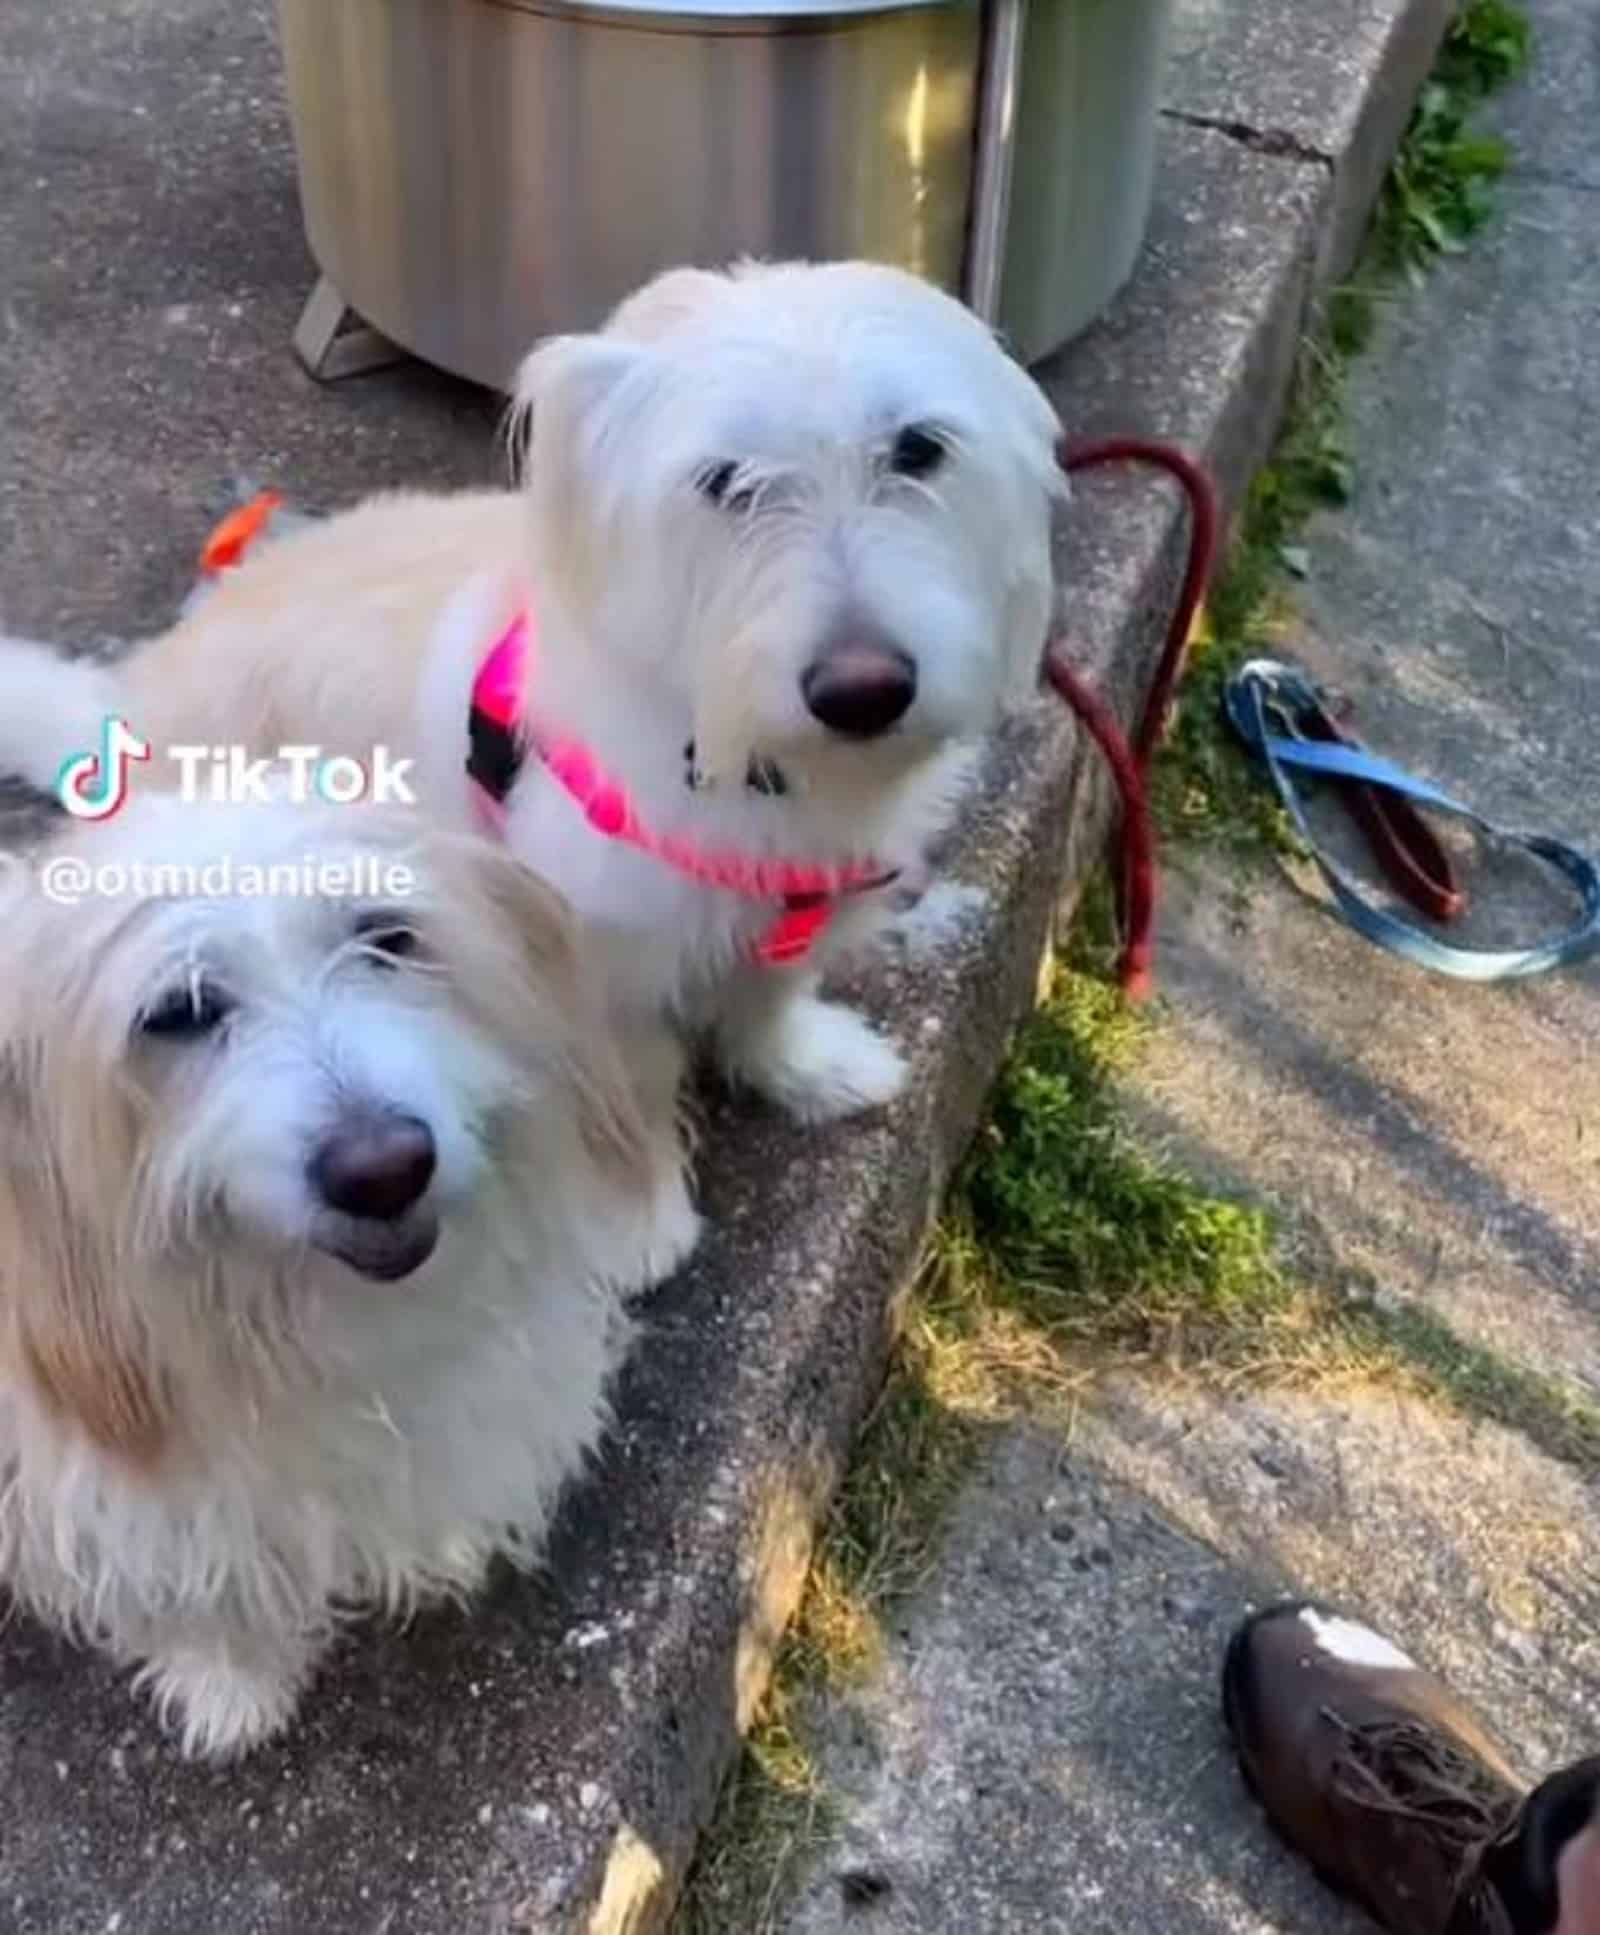 two cute white dogs sitting together on the street